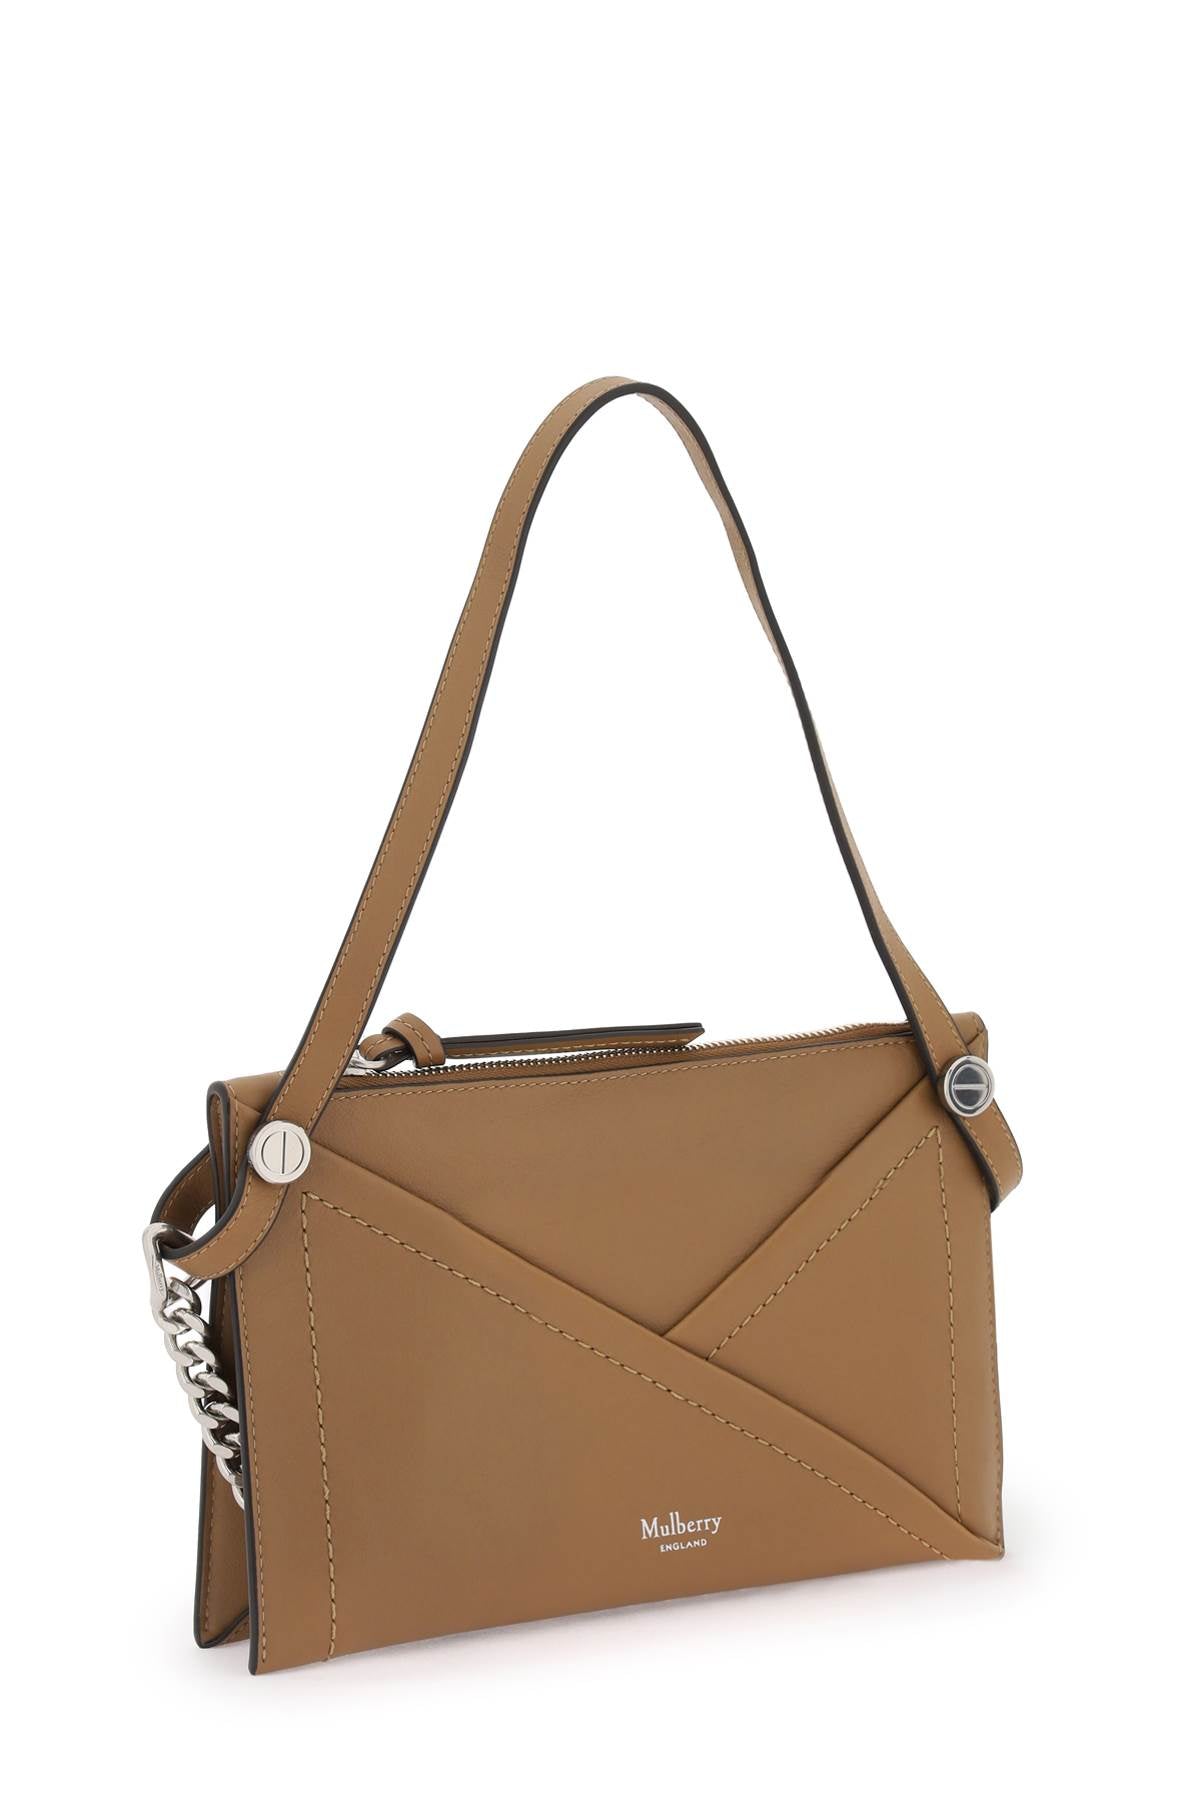 Shop Mulberry Brown Leather Envelope-like Handbag With Swappable Handles